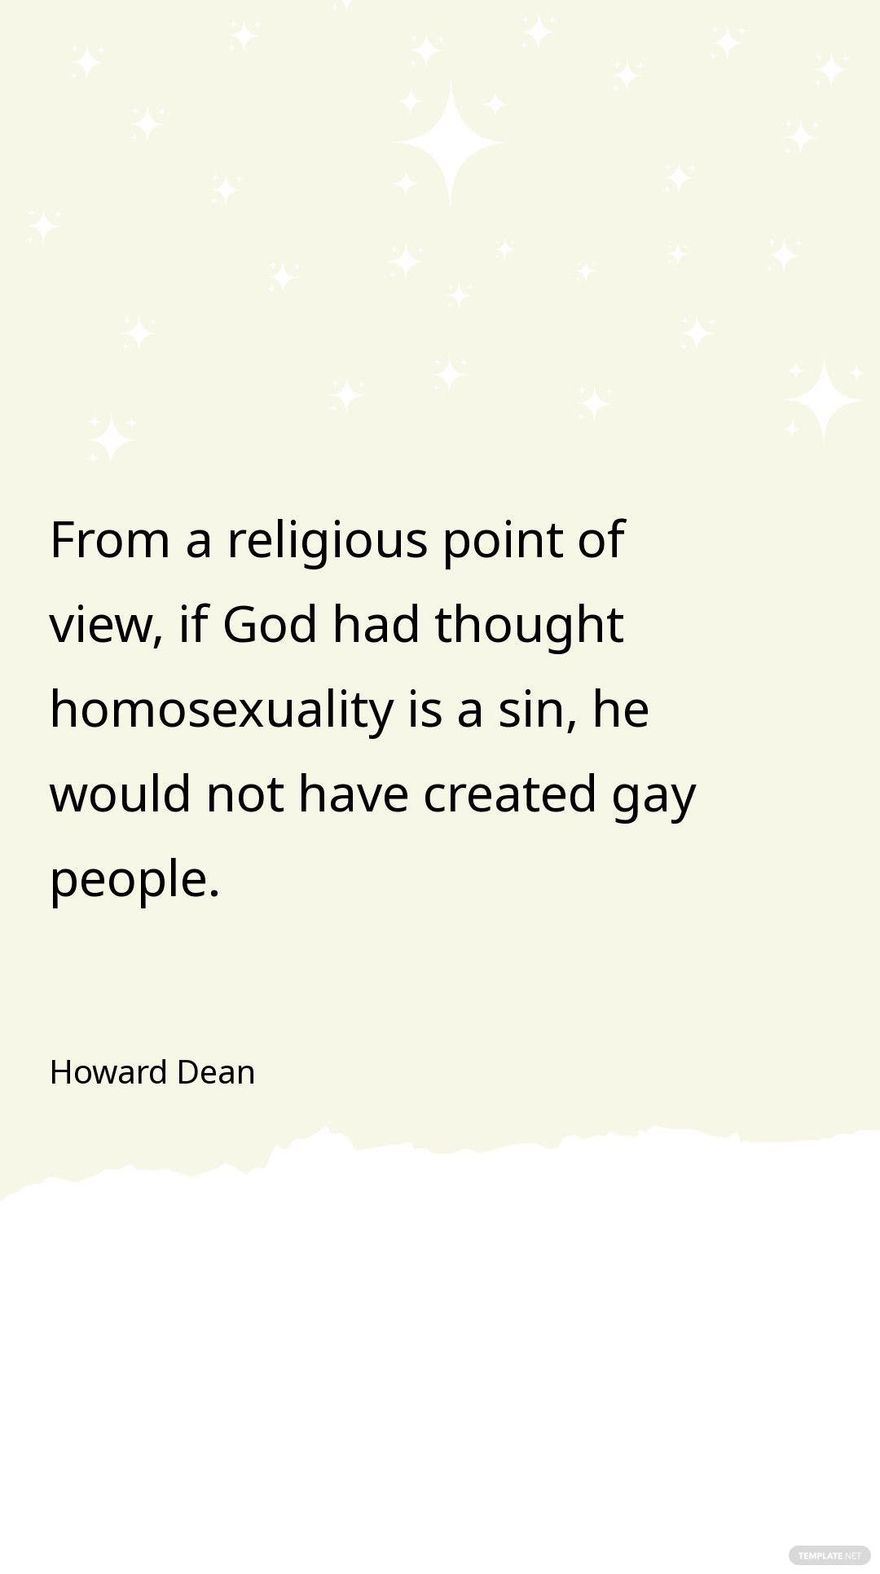 Howard Dean - From a religious point of view, if God had thought homosexuality is a sin, he would not have created gay people.